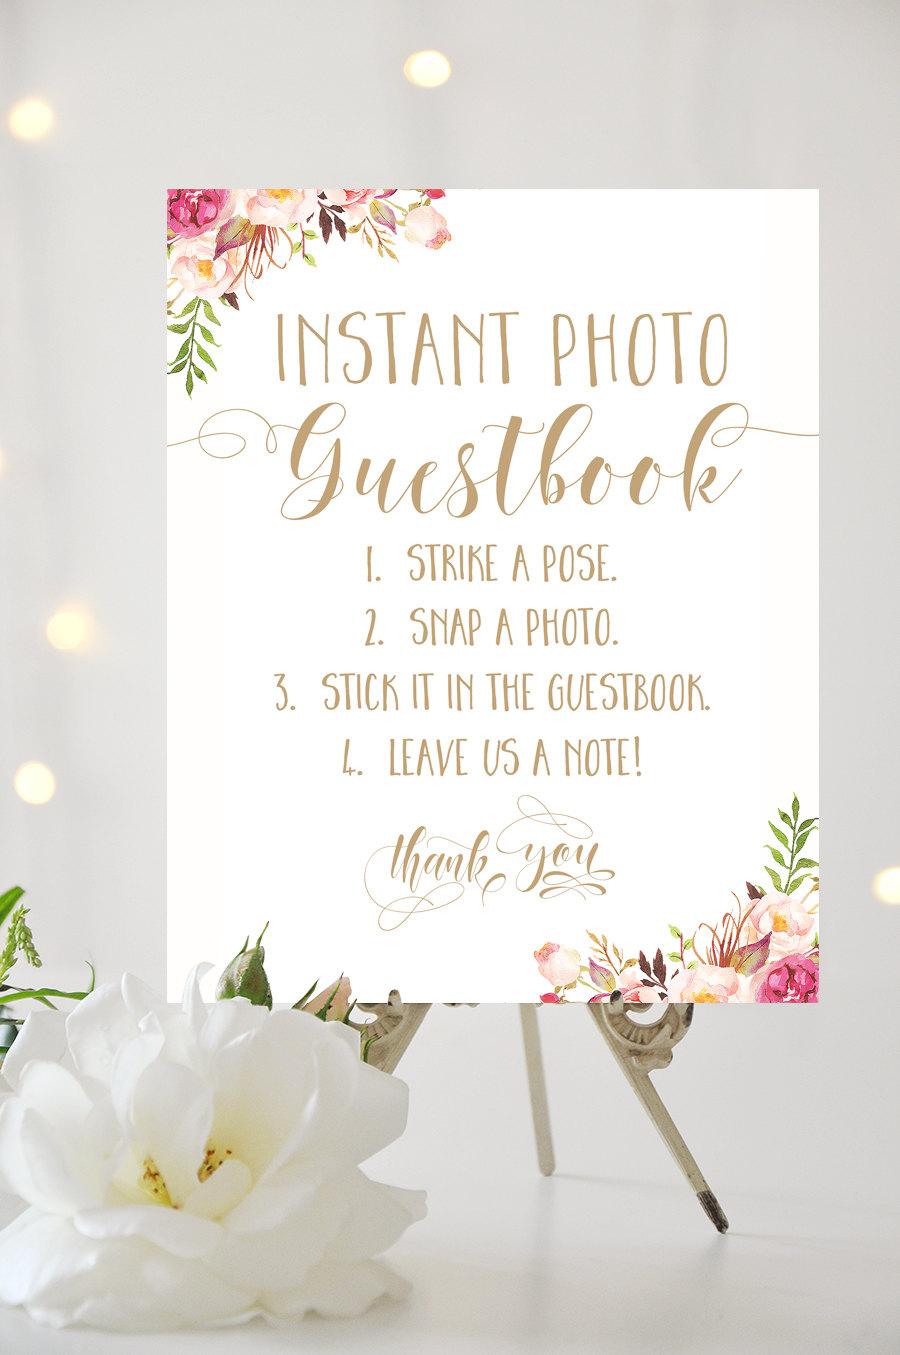 Wedding - Instant Photo Guestbook Sign - 8 x 10 - Printable sign in "Shine" antique gold  - Romantic Blooms - PDF and JPG files - Instant Download